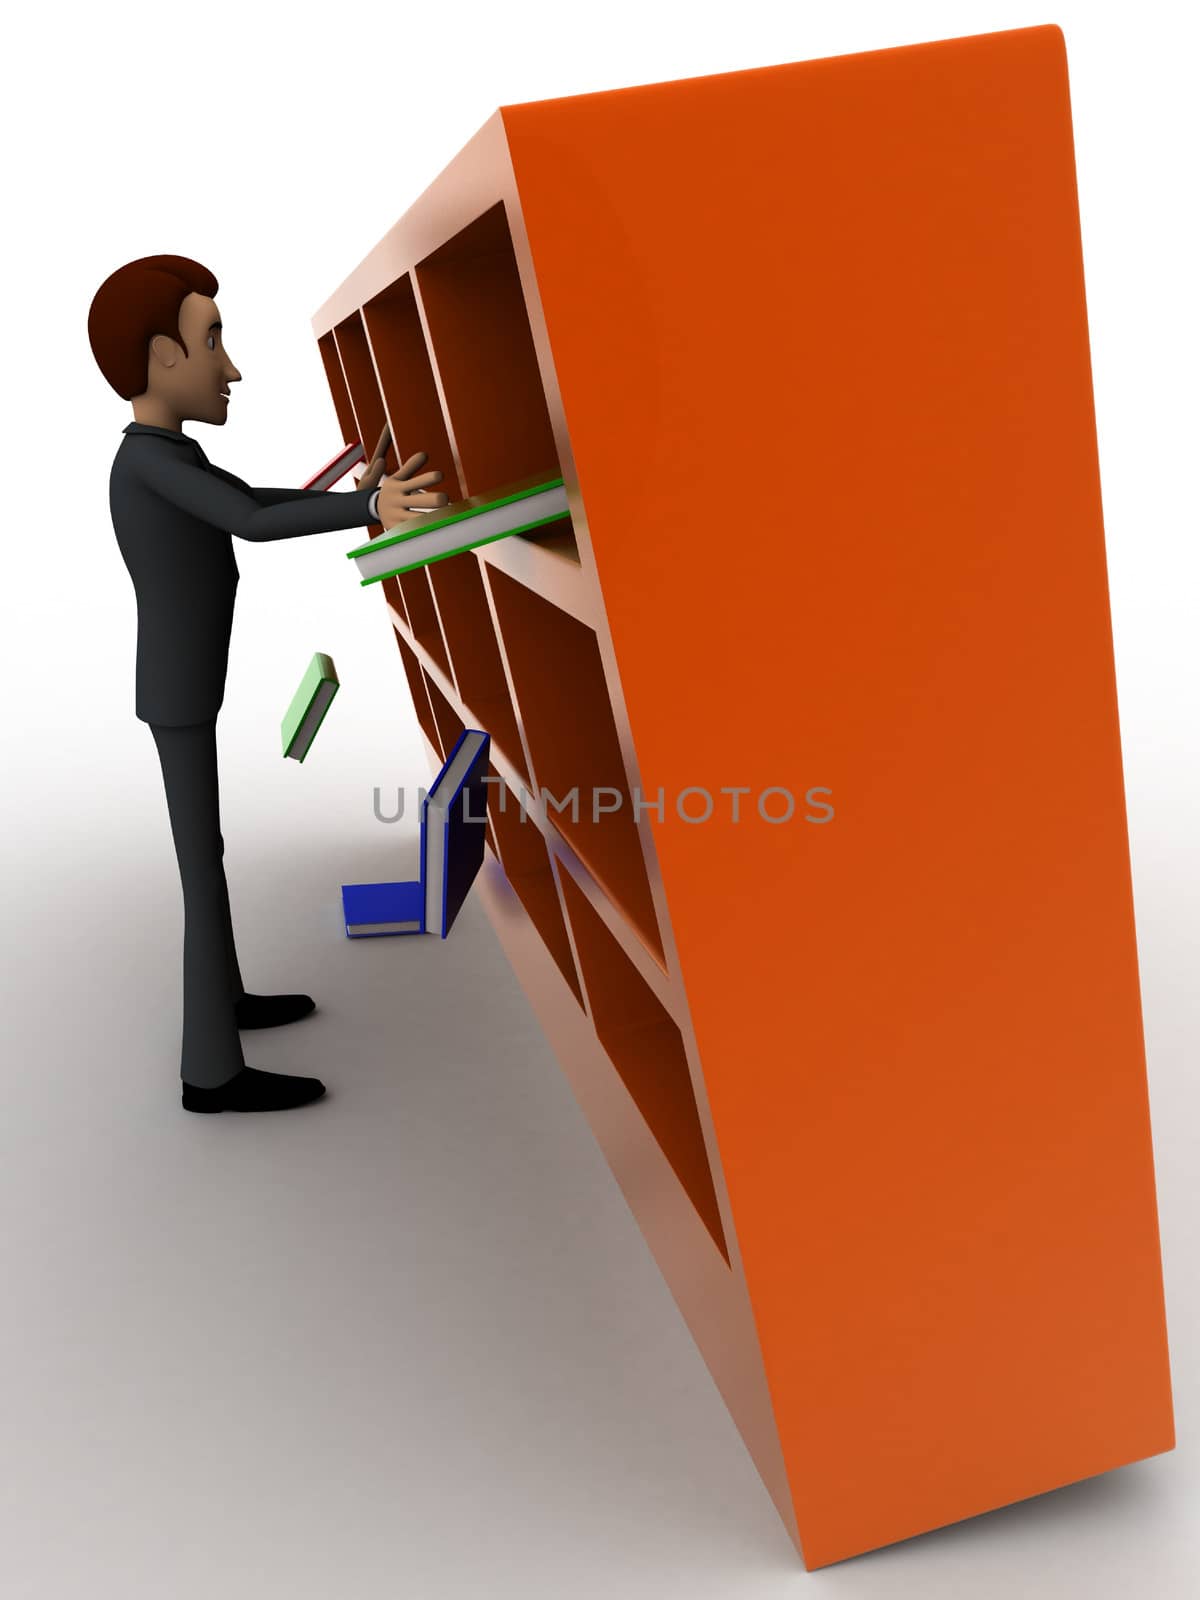 3d man under falling books and book shelf concept on white background, side angle view